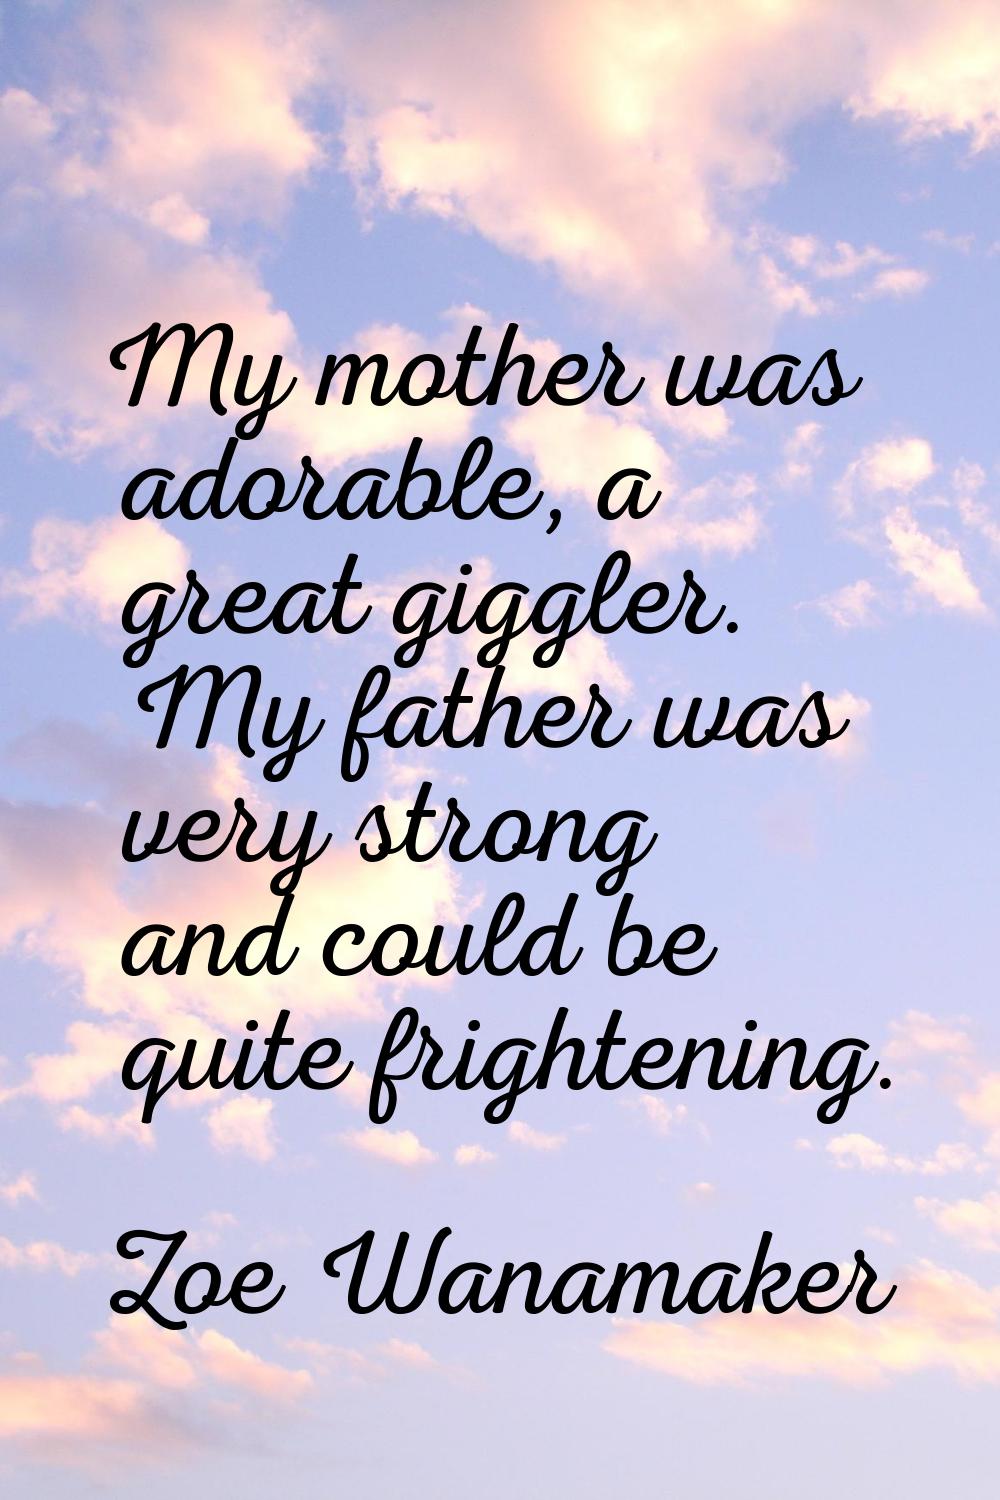 My mother was adorable, a great giggler. My father was very strong and could be quite frightening.